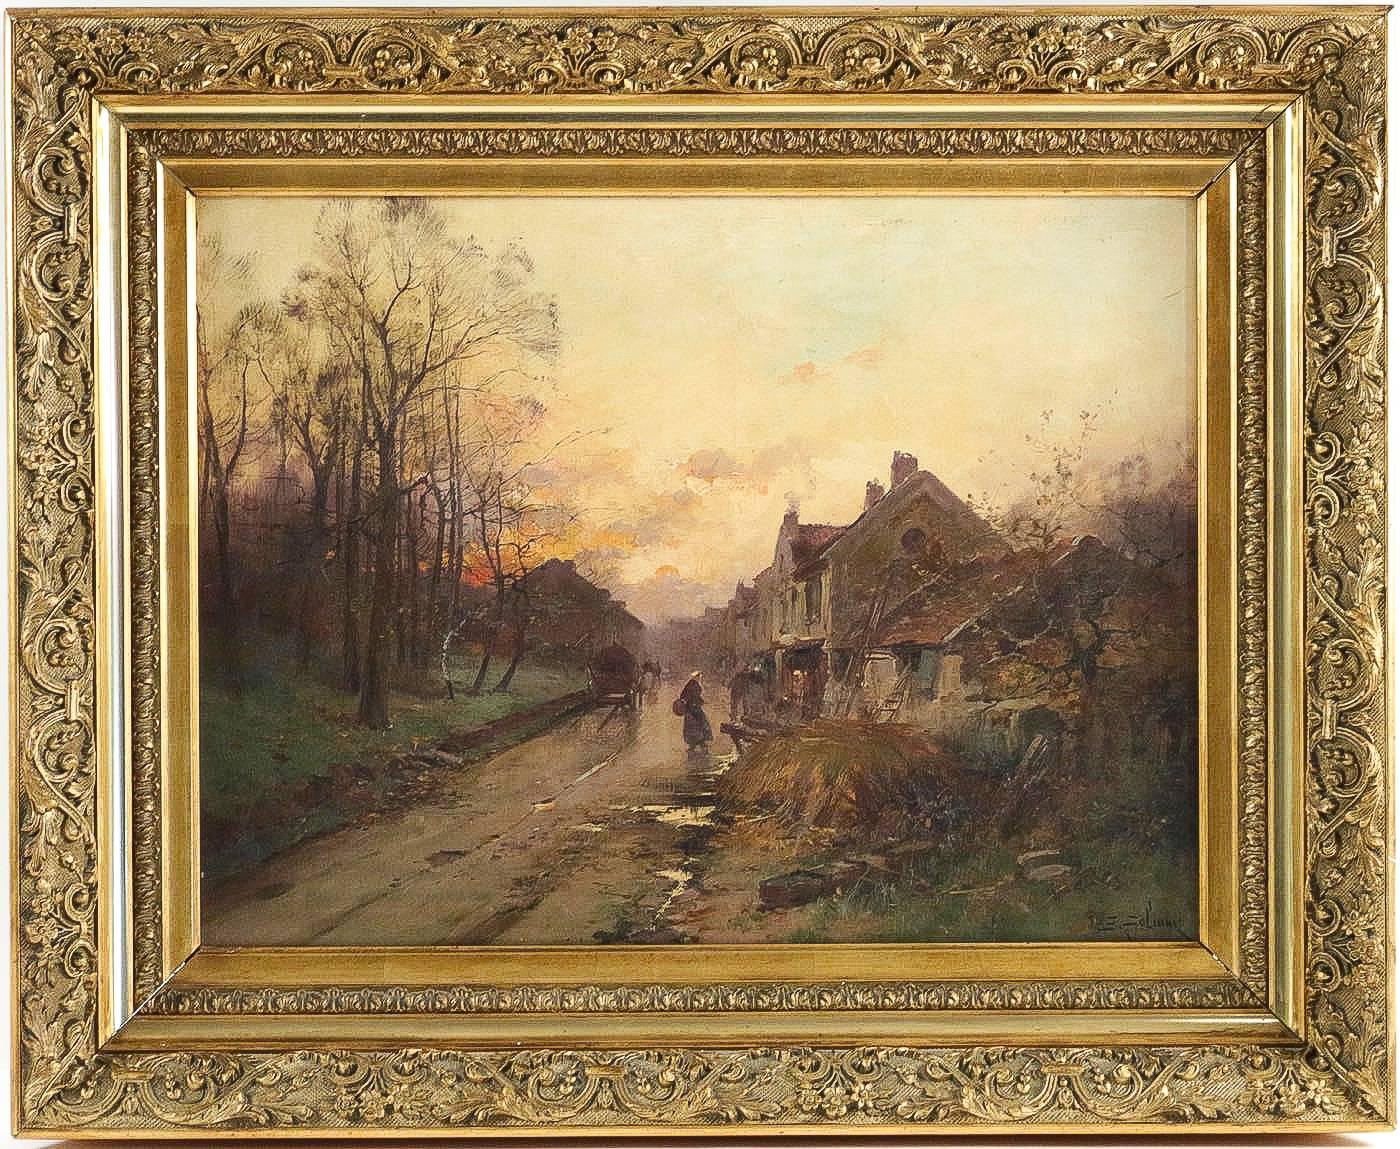 We are pleased to present you, a lovely oil on canvas depicting a sunset in a village, rural scene close to Fontainebleau forest, sign on a lower right by E Galiany, pseudonym of the famous French painter Eugène Galien-Laloue.

Beautiful Barbizon